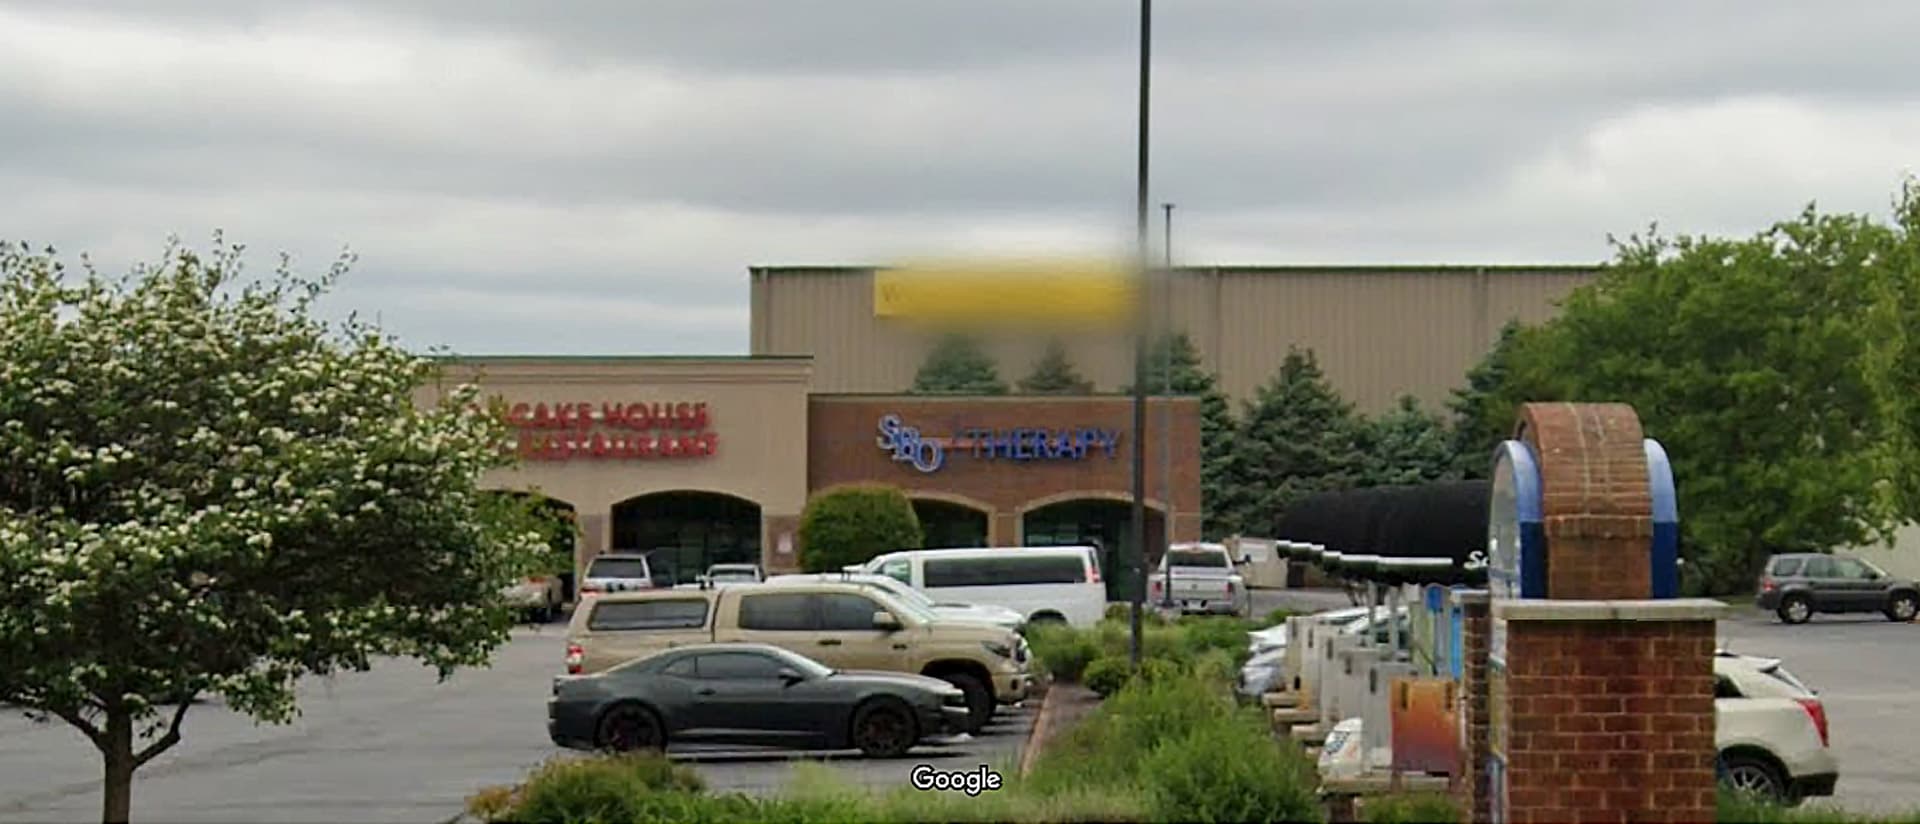 Screenshot of Google Street View for Elkhart Therapy (Courtesy Google)